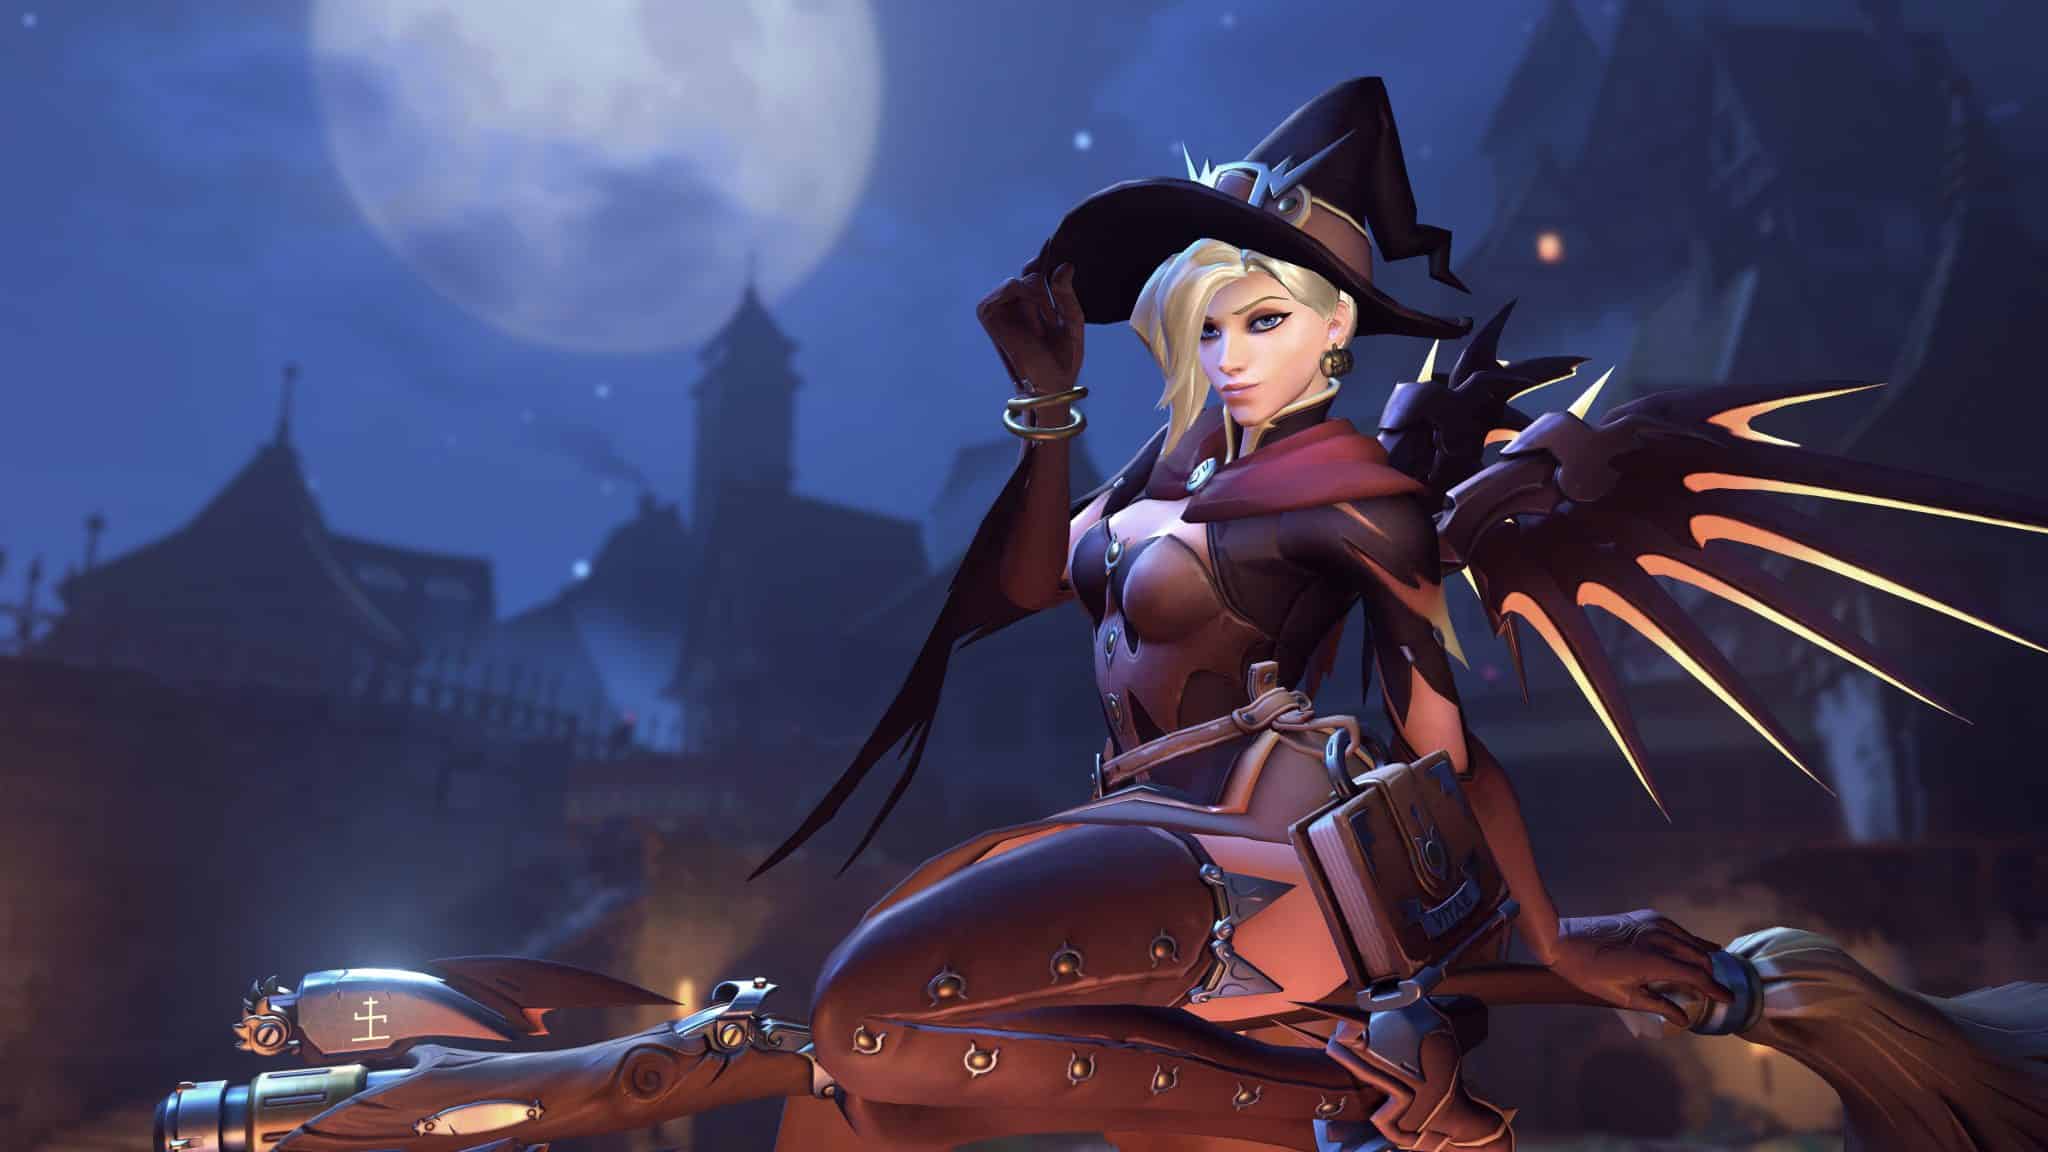 overwatch halloween mercy skin dressed as a witch on a broomstick in front of a creepy castle